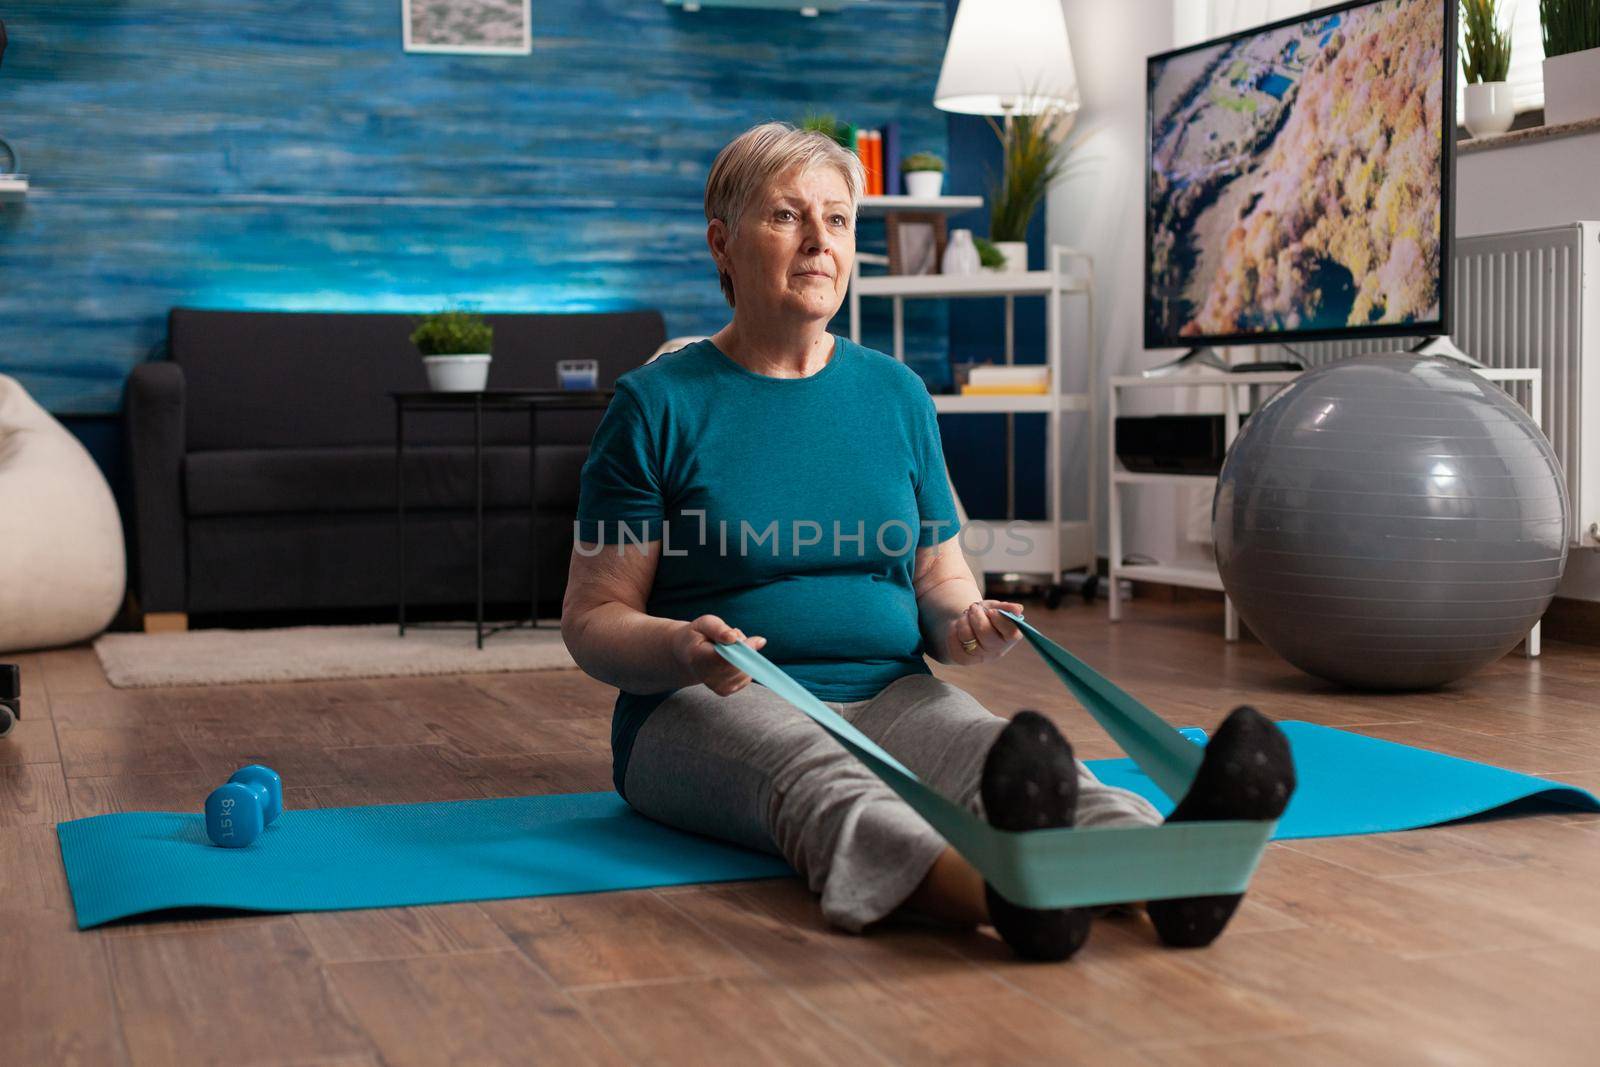 Retirement senior woman sitting on yoga mat stretching legs muscles using stretch elastic band by DCStudio